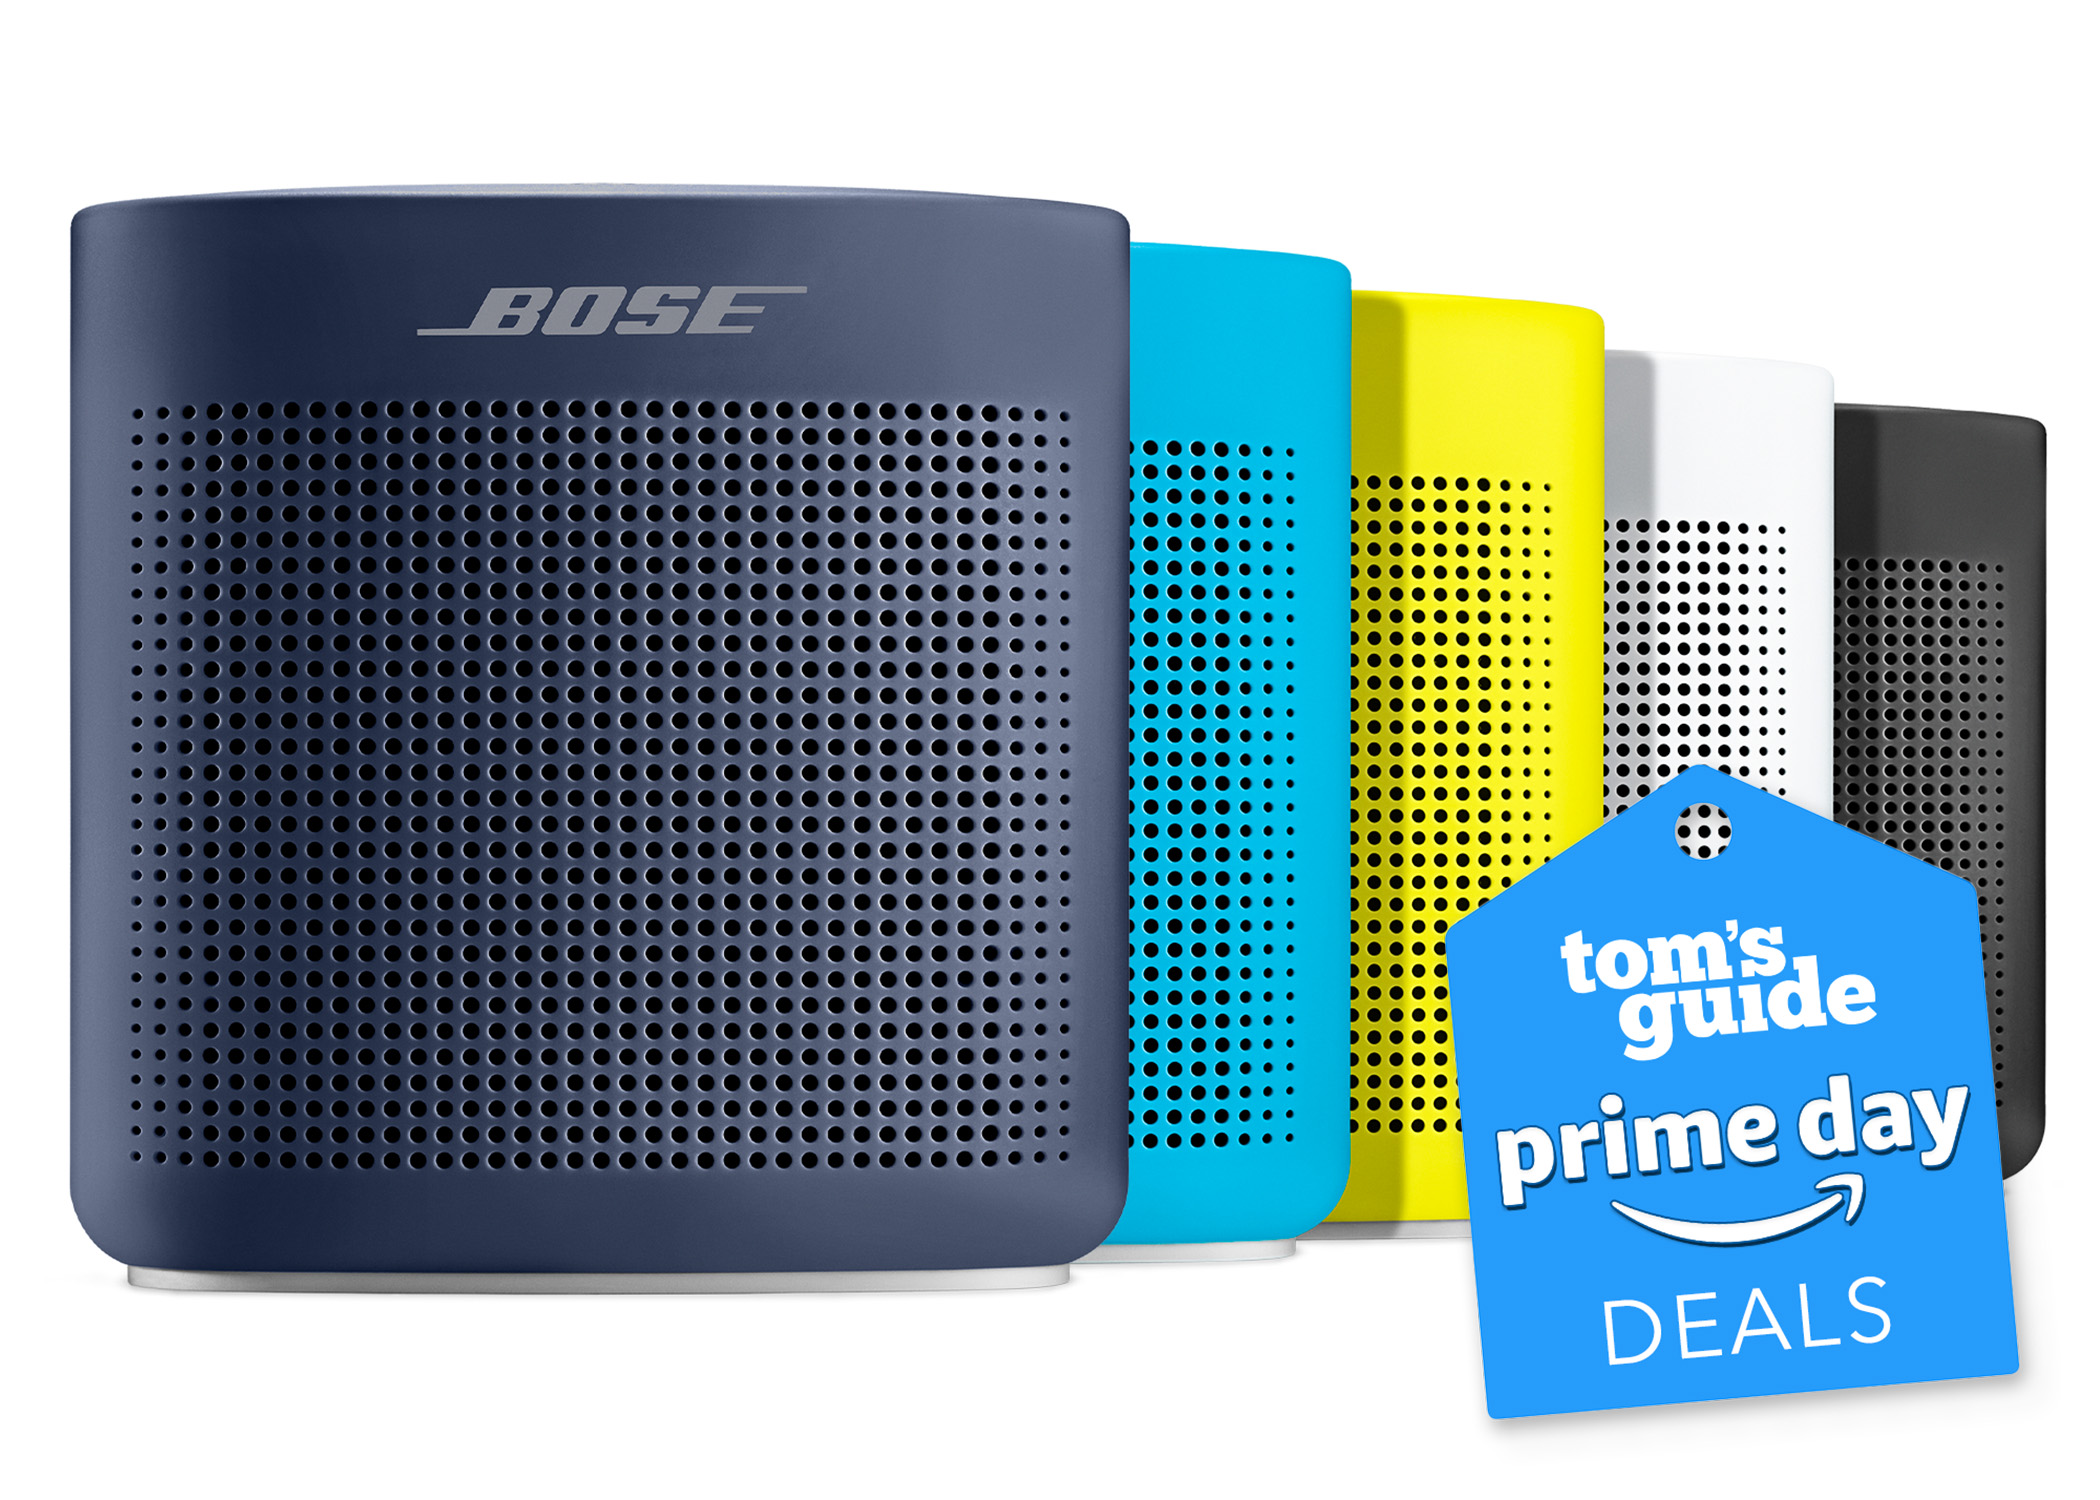 Image of Bose SoundLink Color speakers in different colors with deal tag